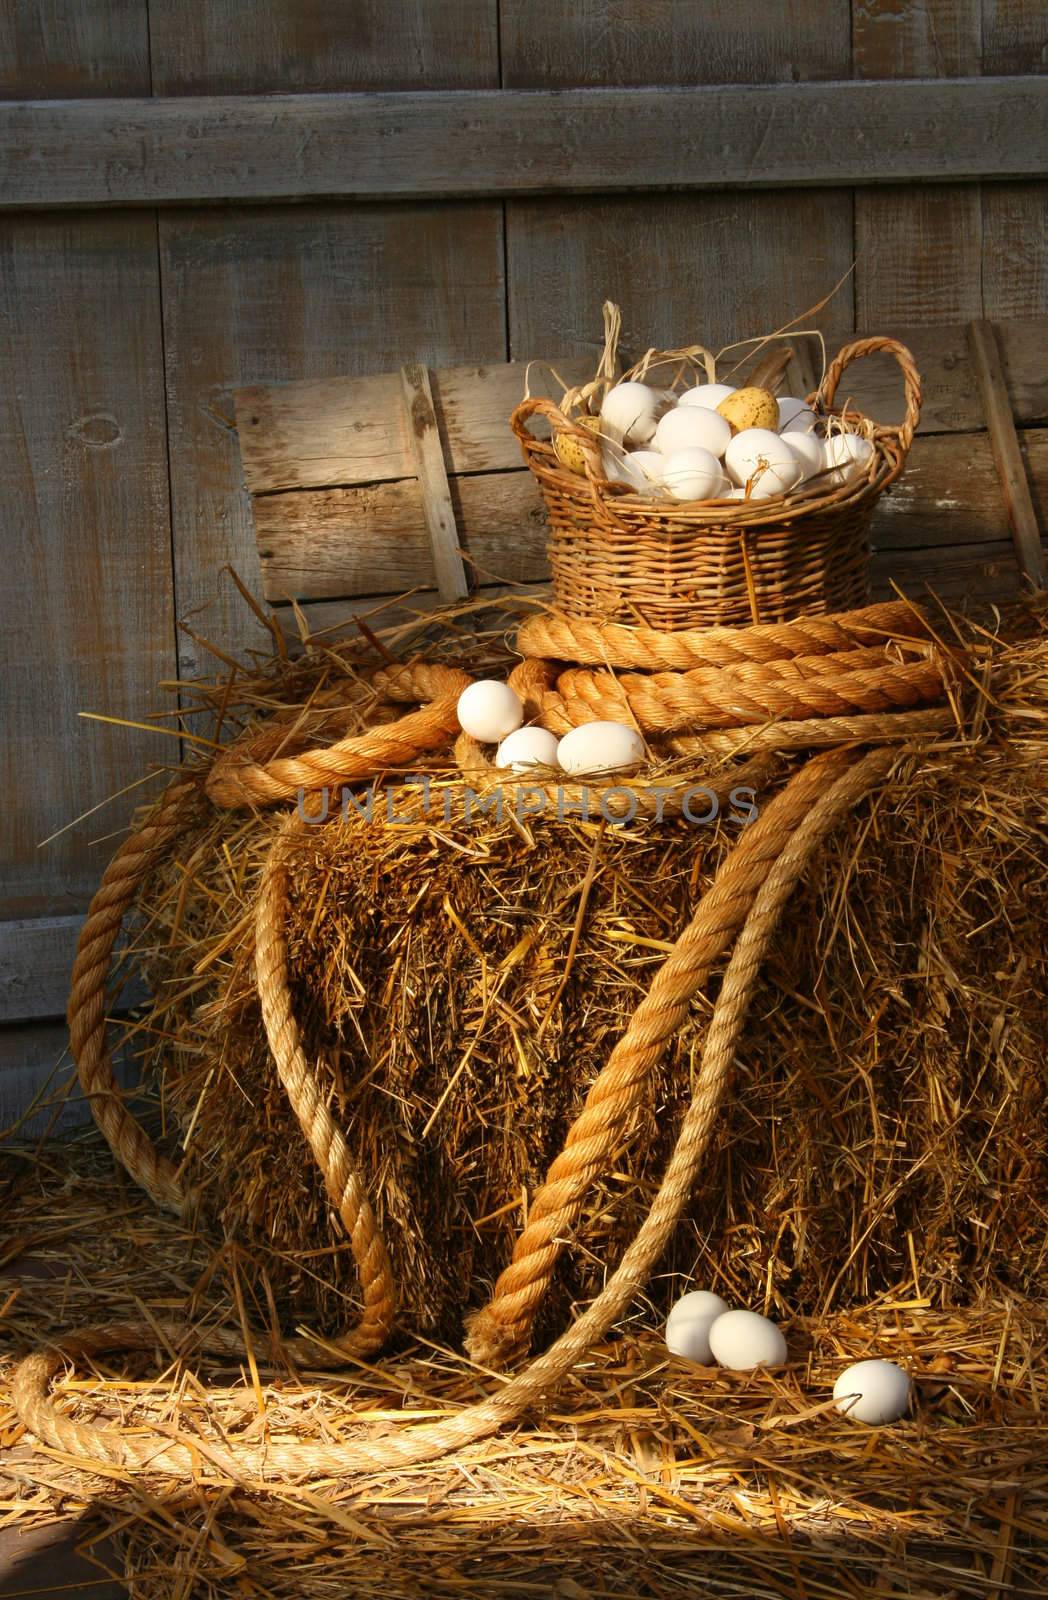 Basket of eggs on a bale of hay by Sandralise